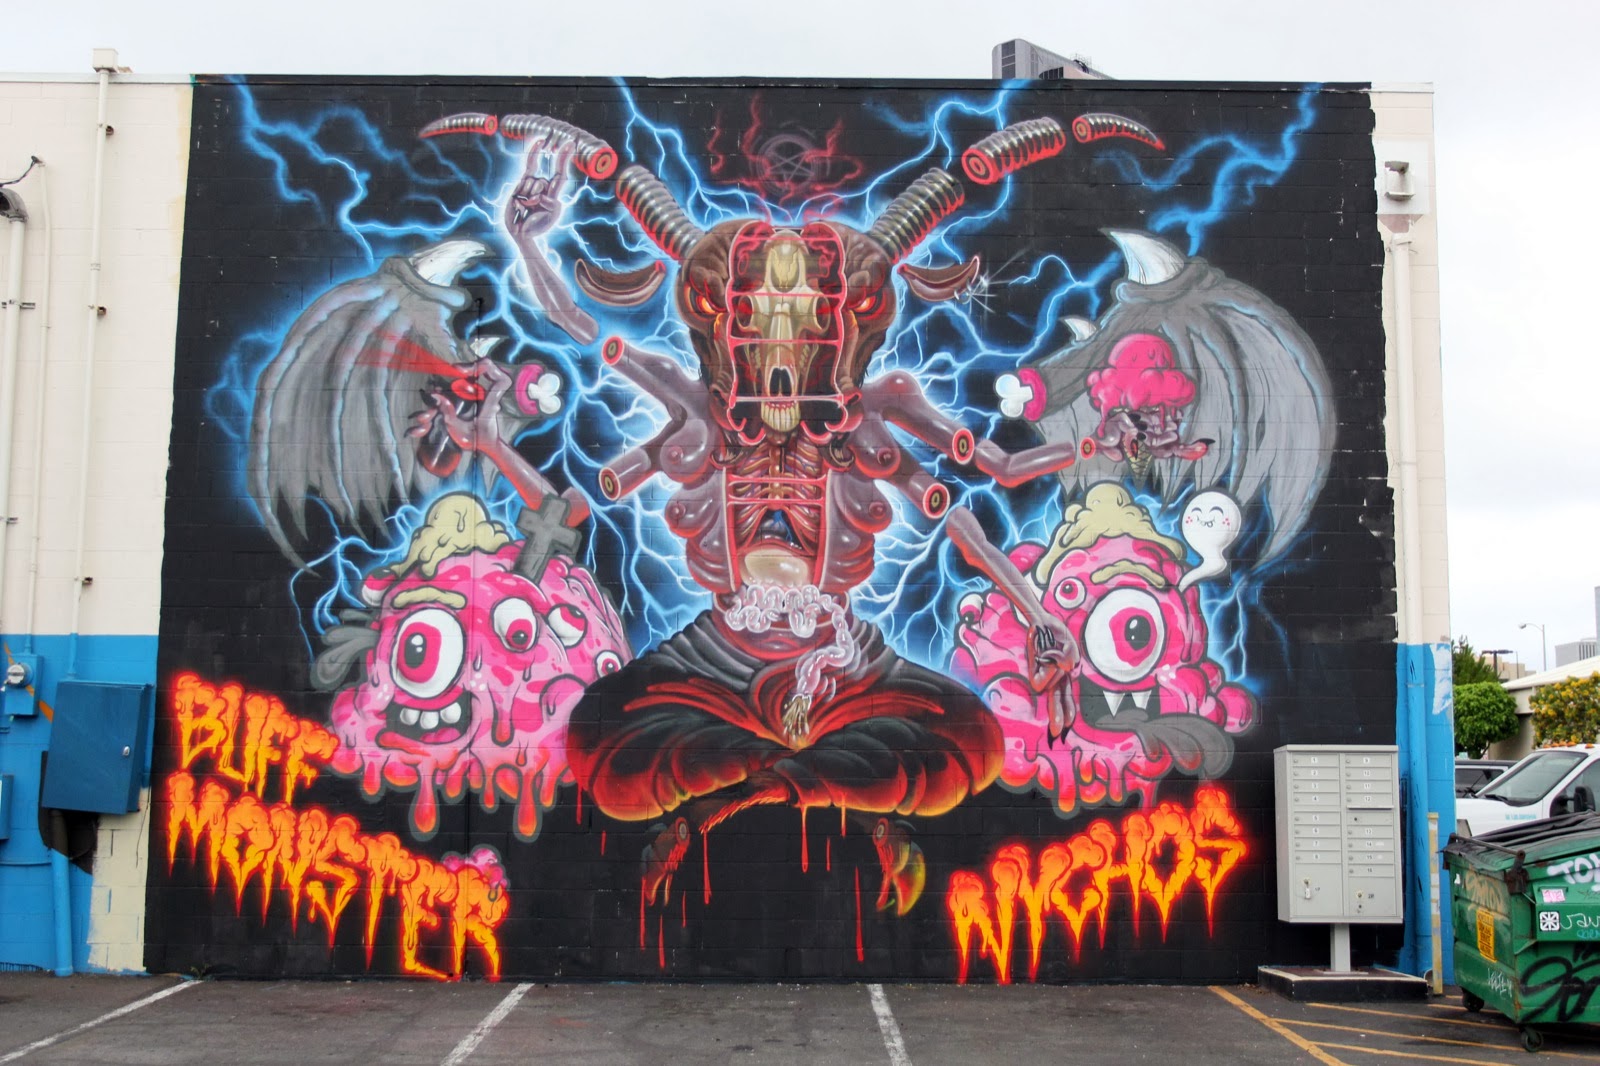 Hail Satan! While you discovered some progress shots a few days ago (covered), Nychos and Buff Monster have now wrapped up their collaboration for POW! WOW! Hawaii in Honolulu. 1